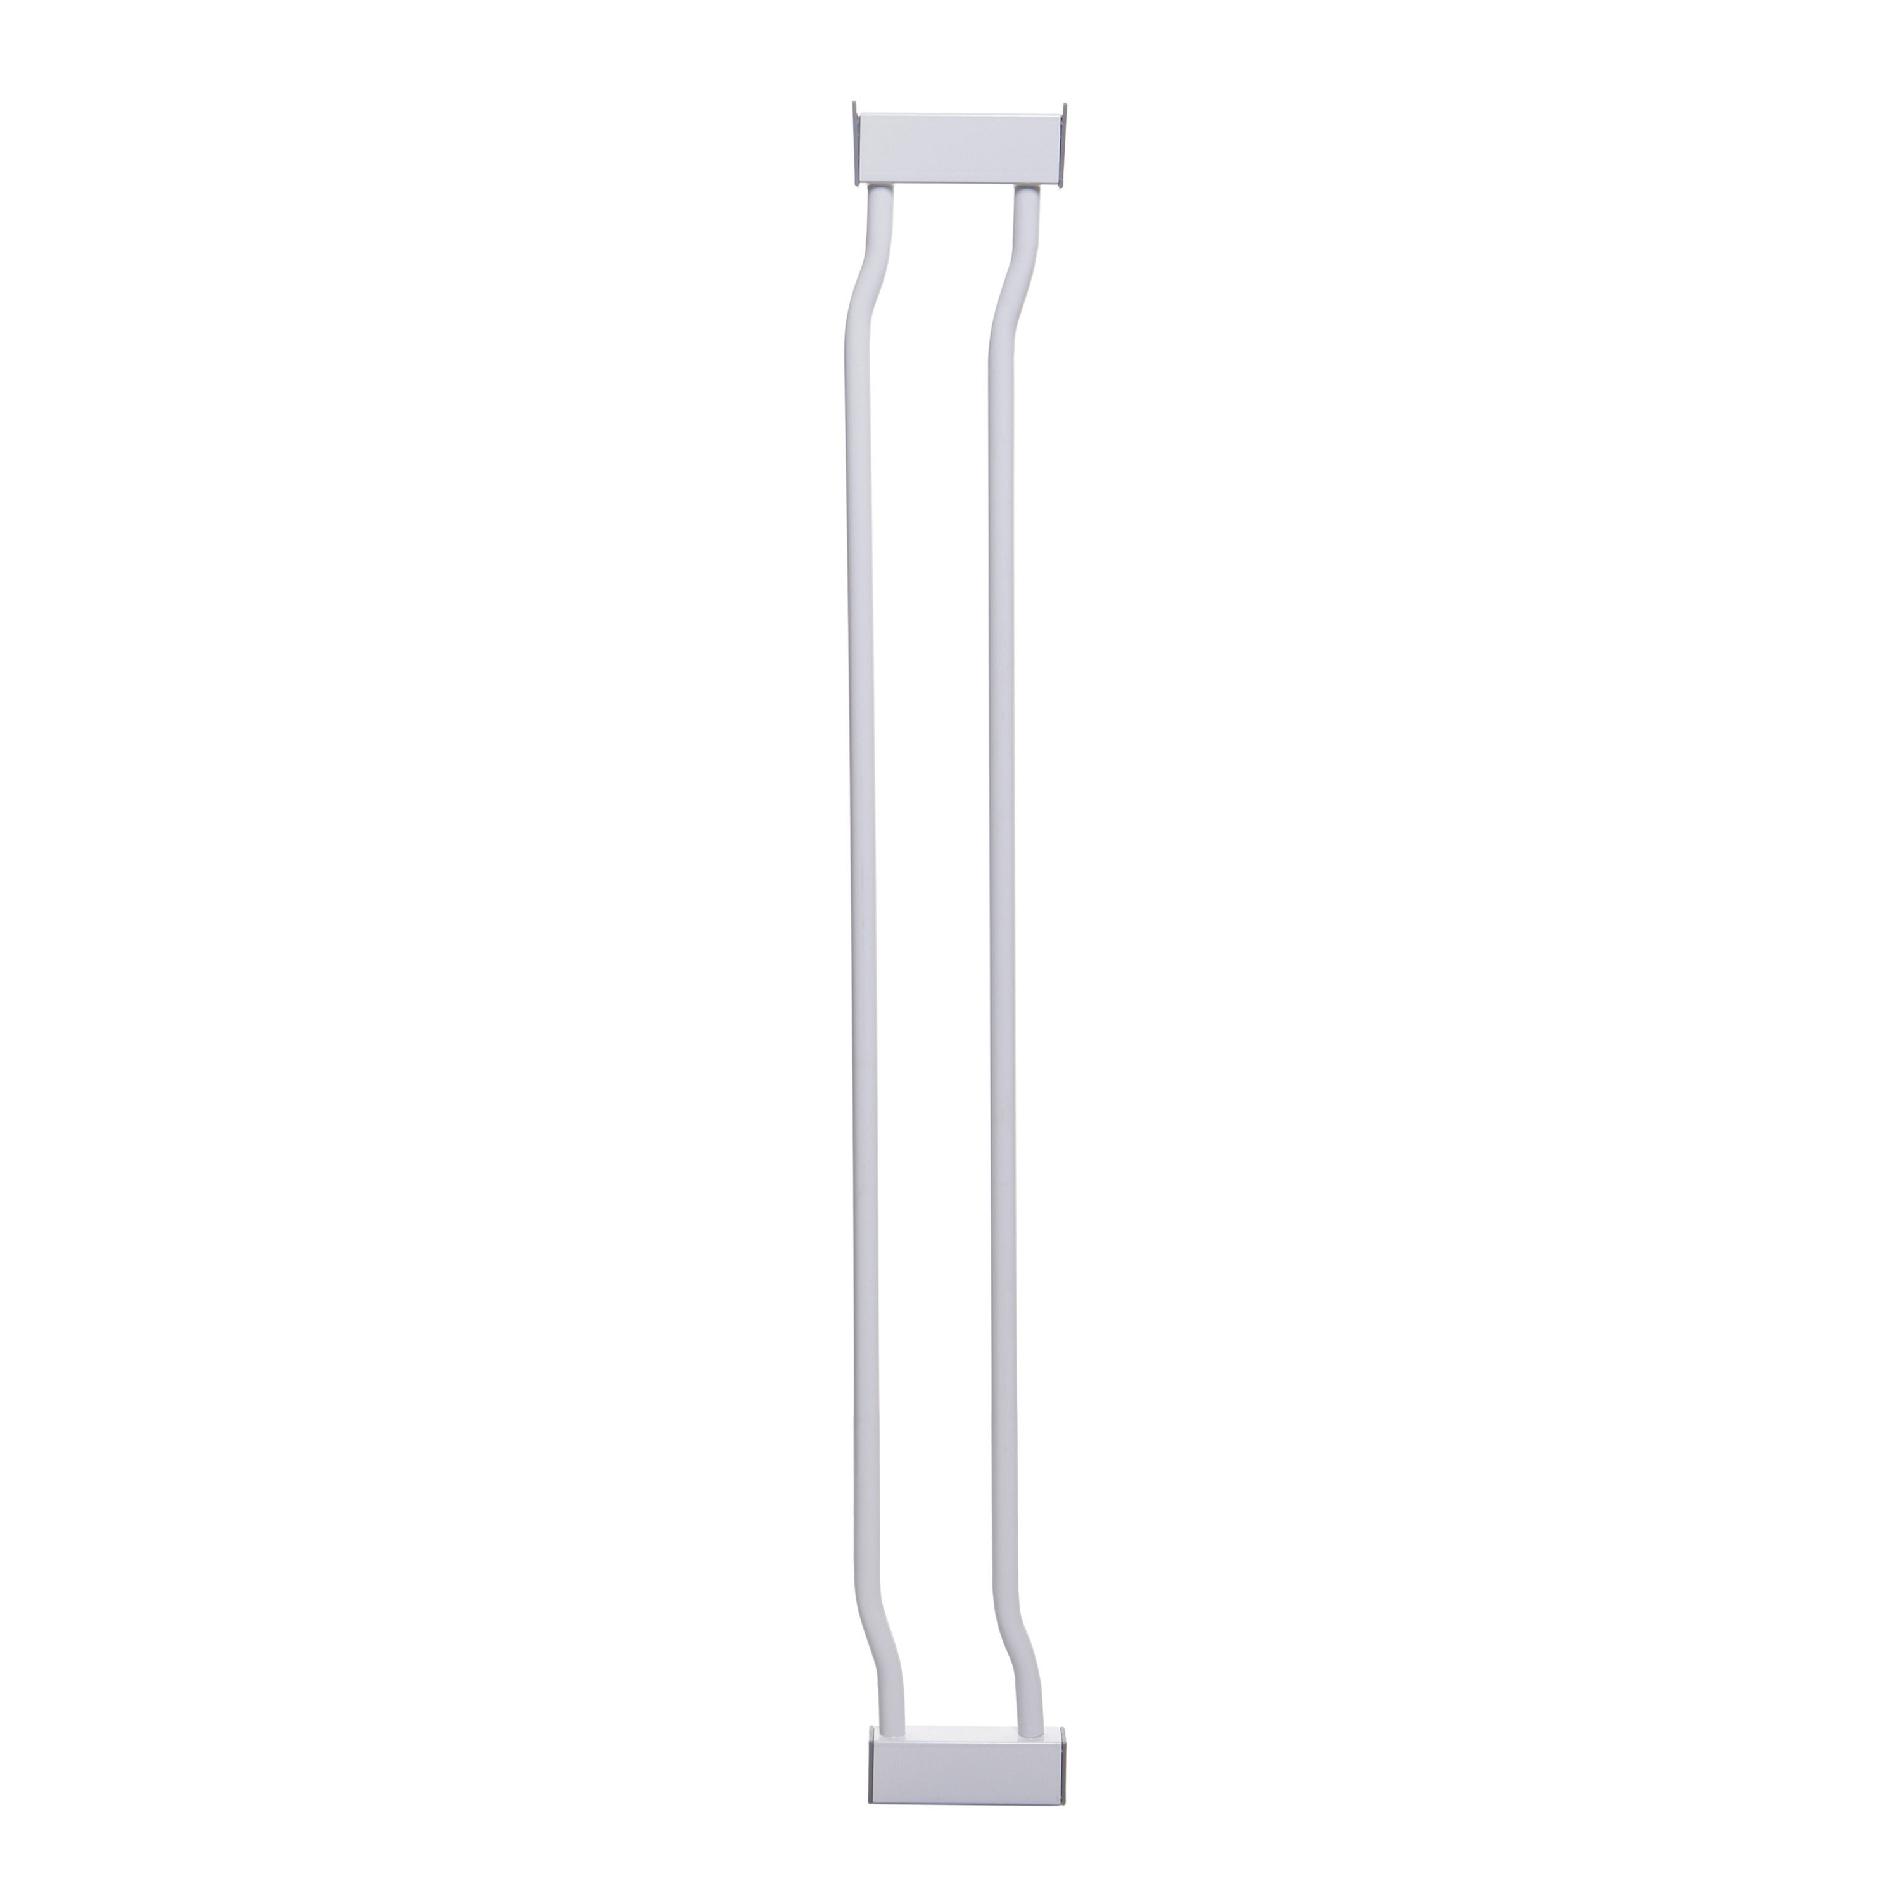 L901 3.5 in. Gate Extension - White